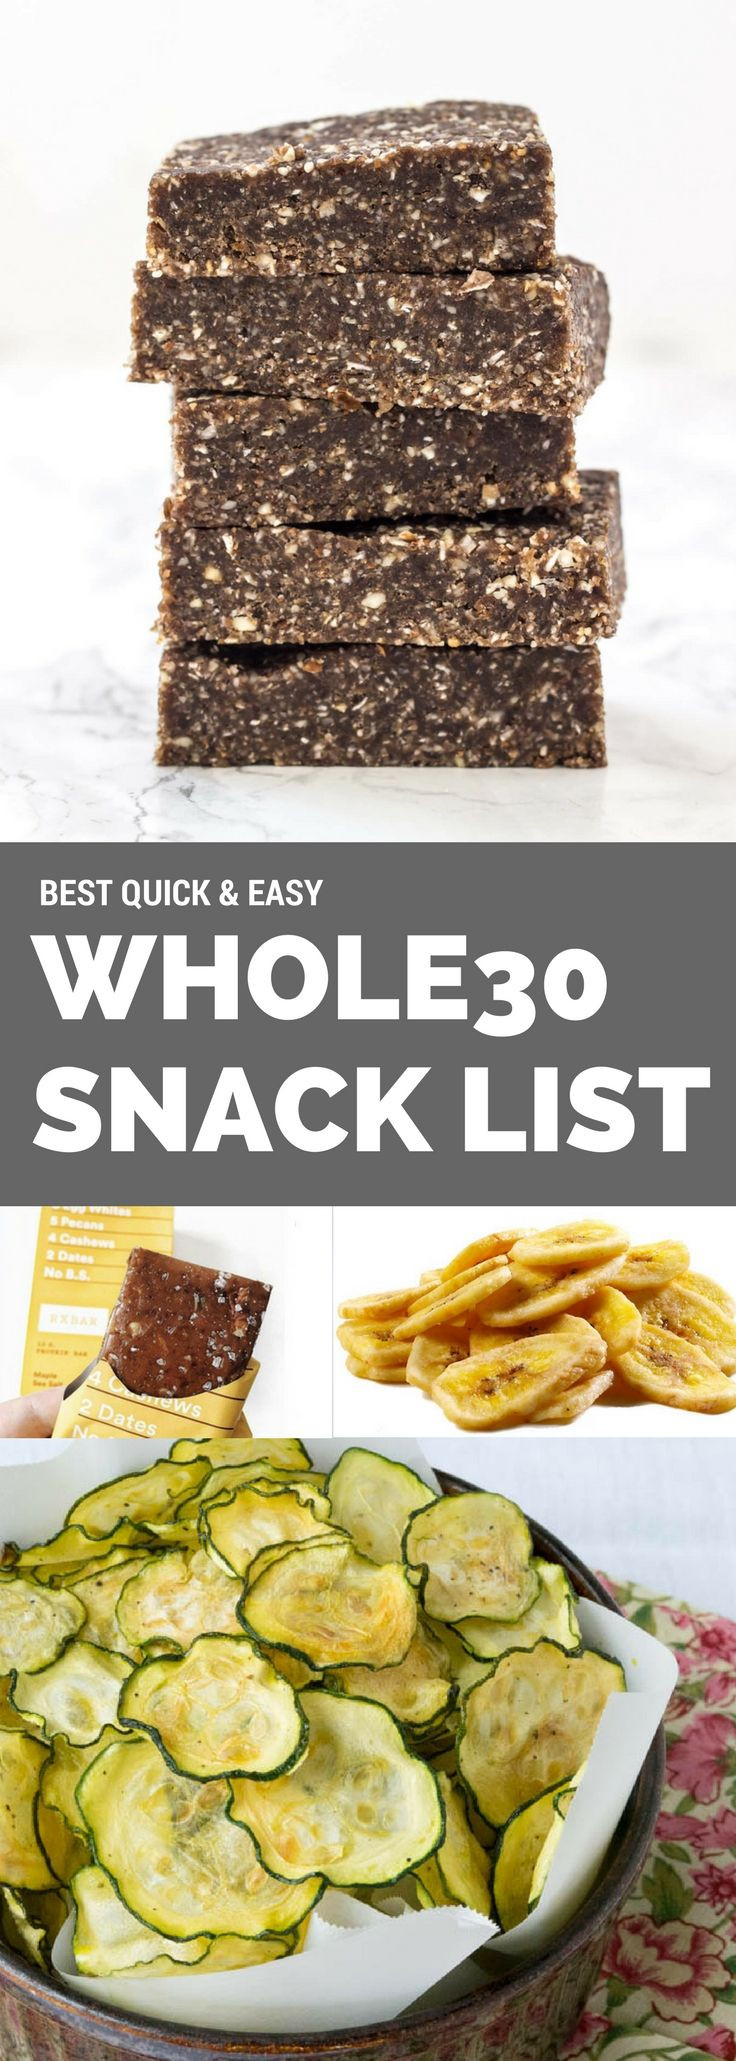 Whole Foods Healthy Snacks
 Easy whole30 snacks on the go Brands recipes and